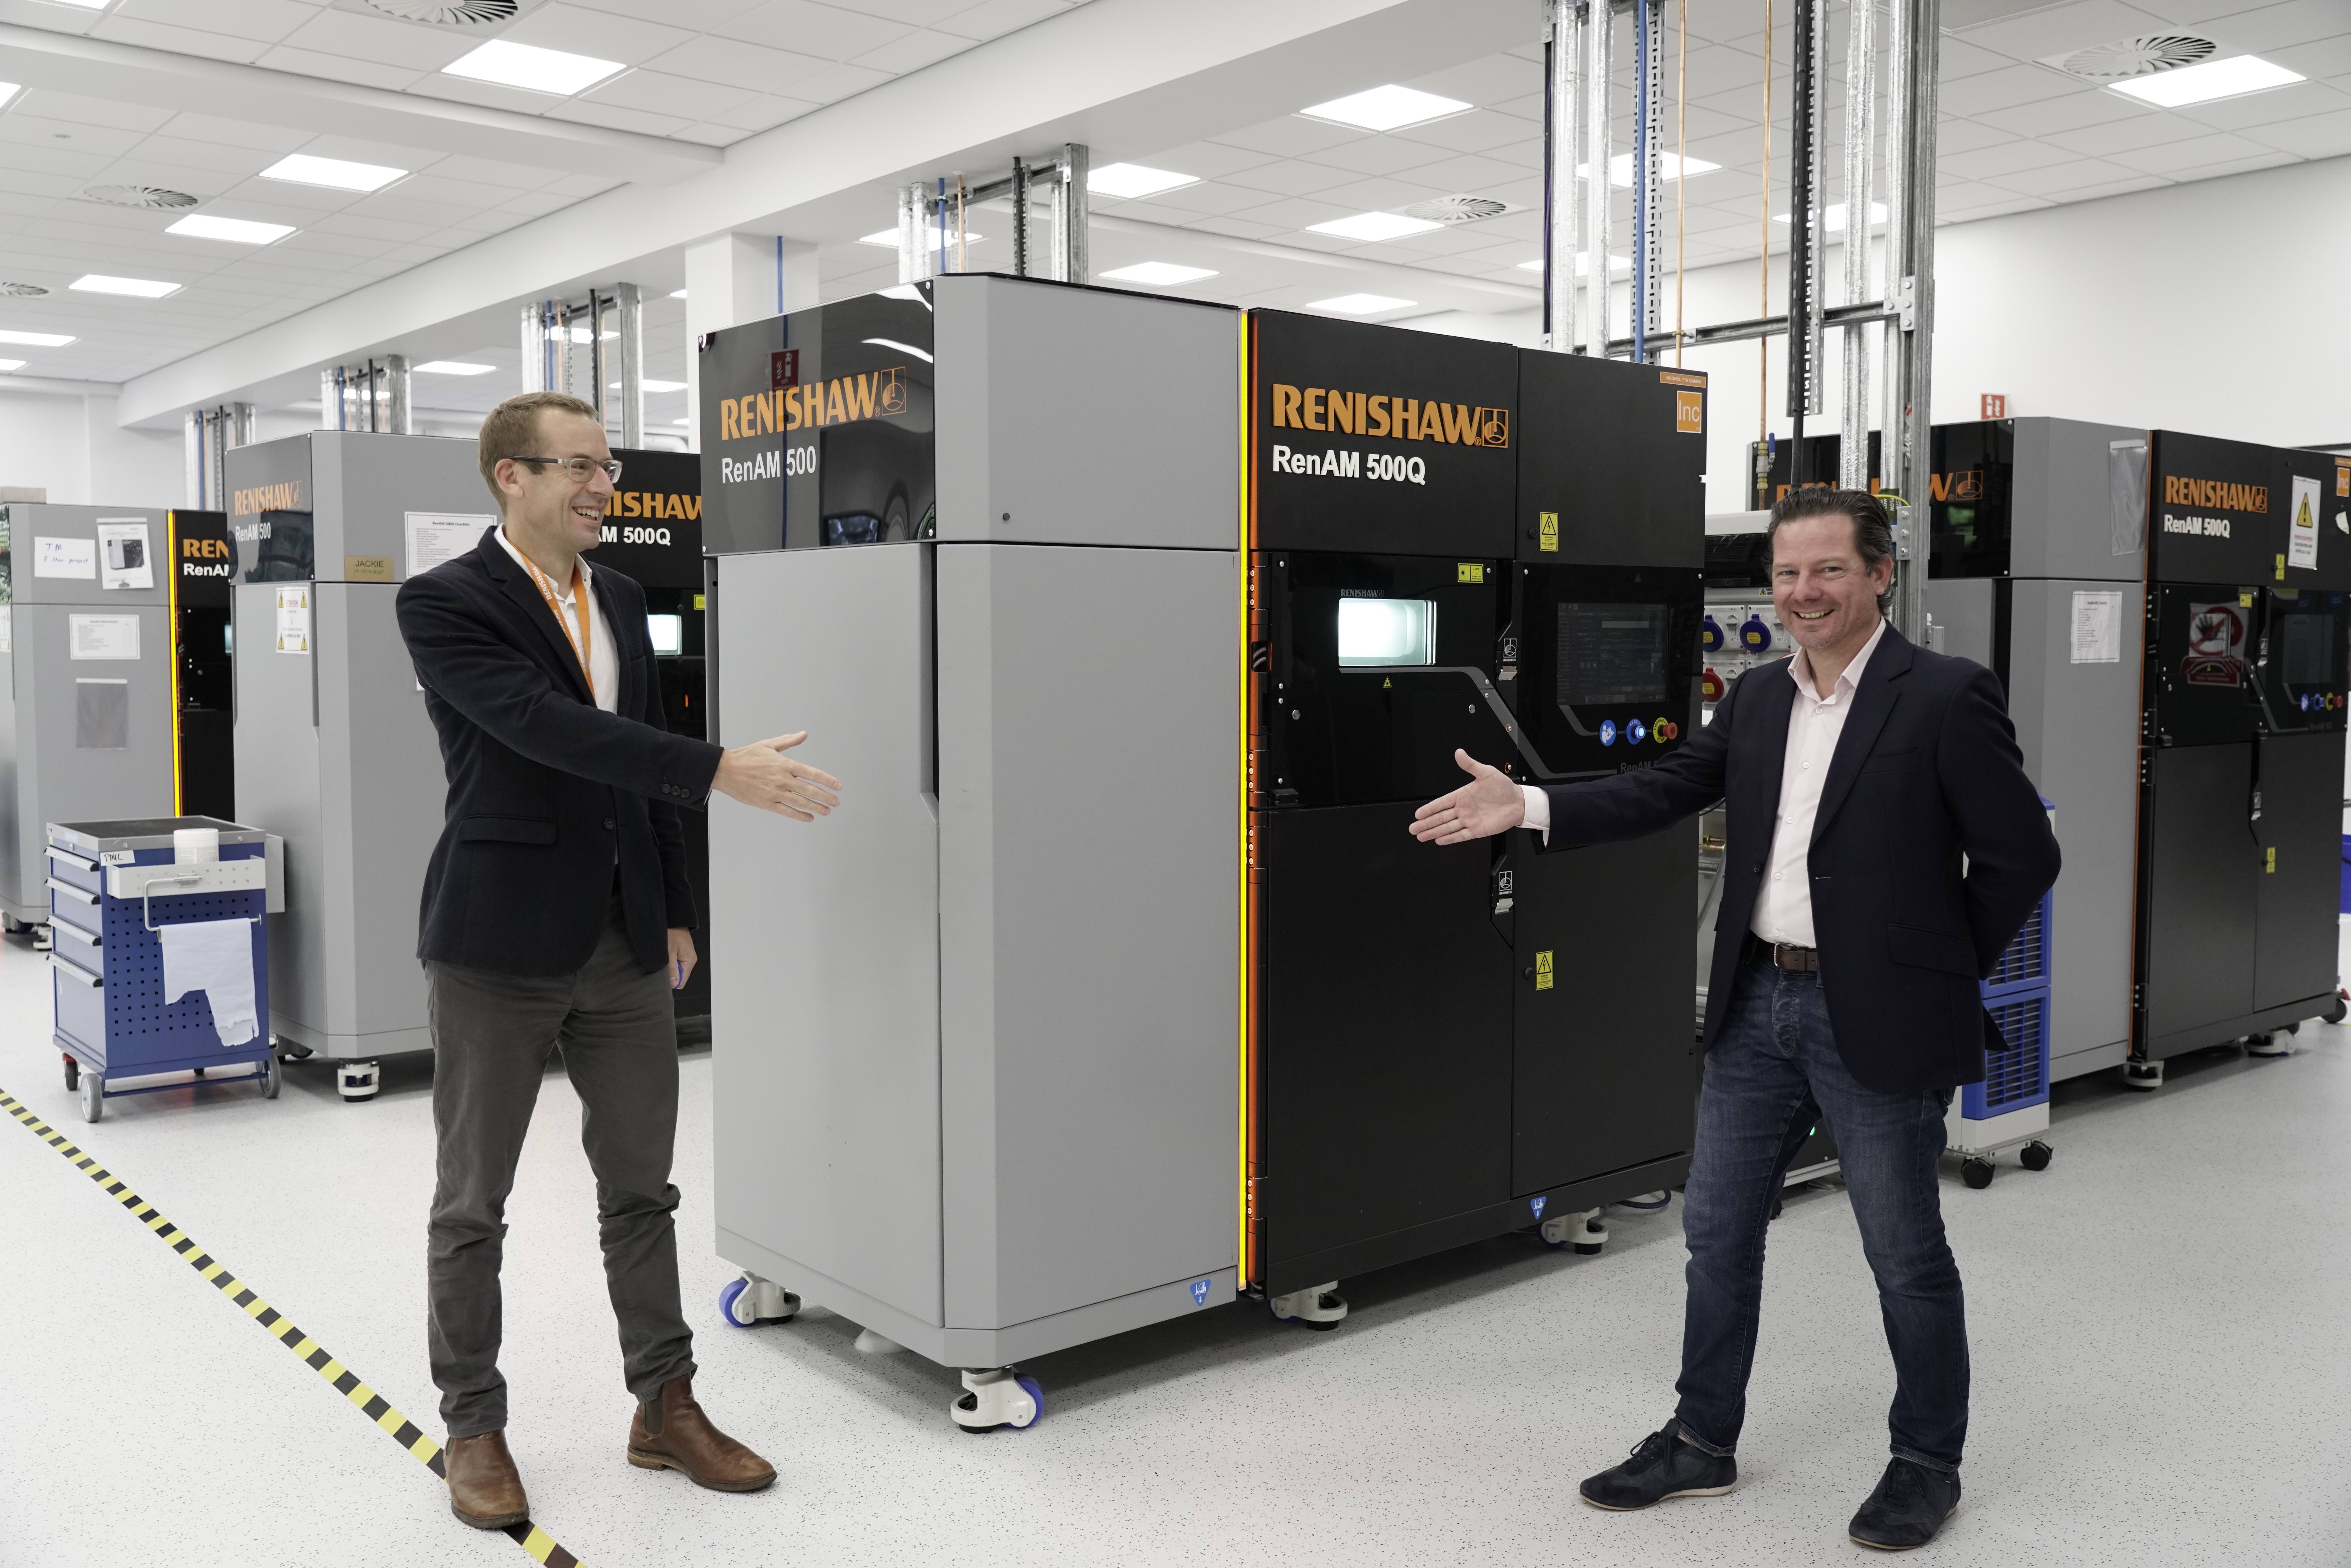 The companies have entered into a joint development collaboration to increase AM quality and efficiency, according to Renishaw.